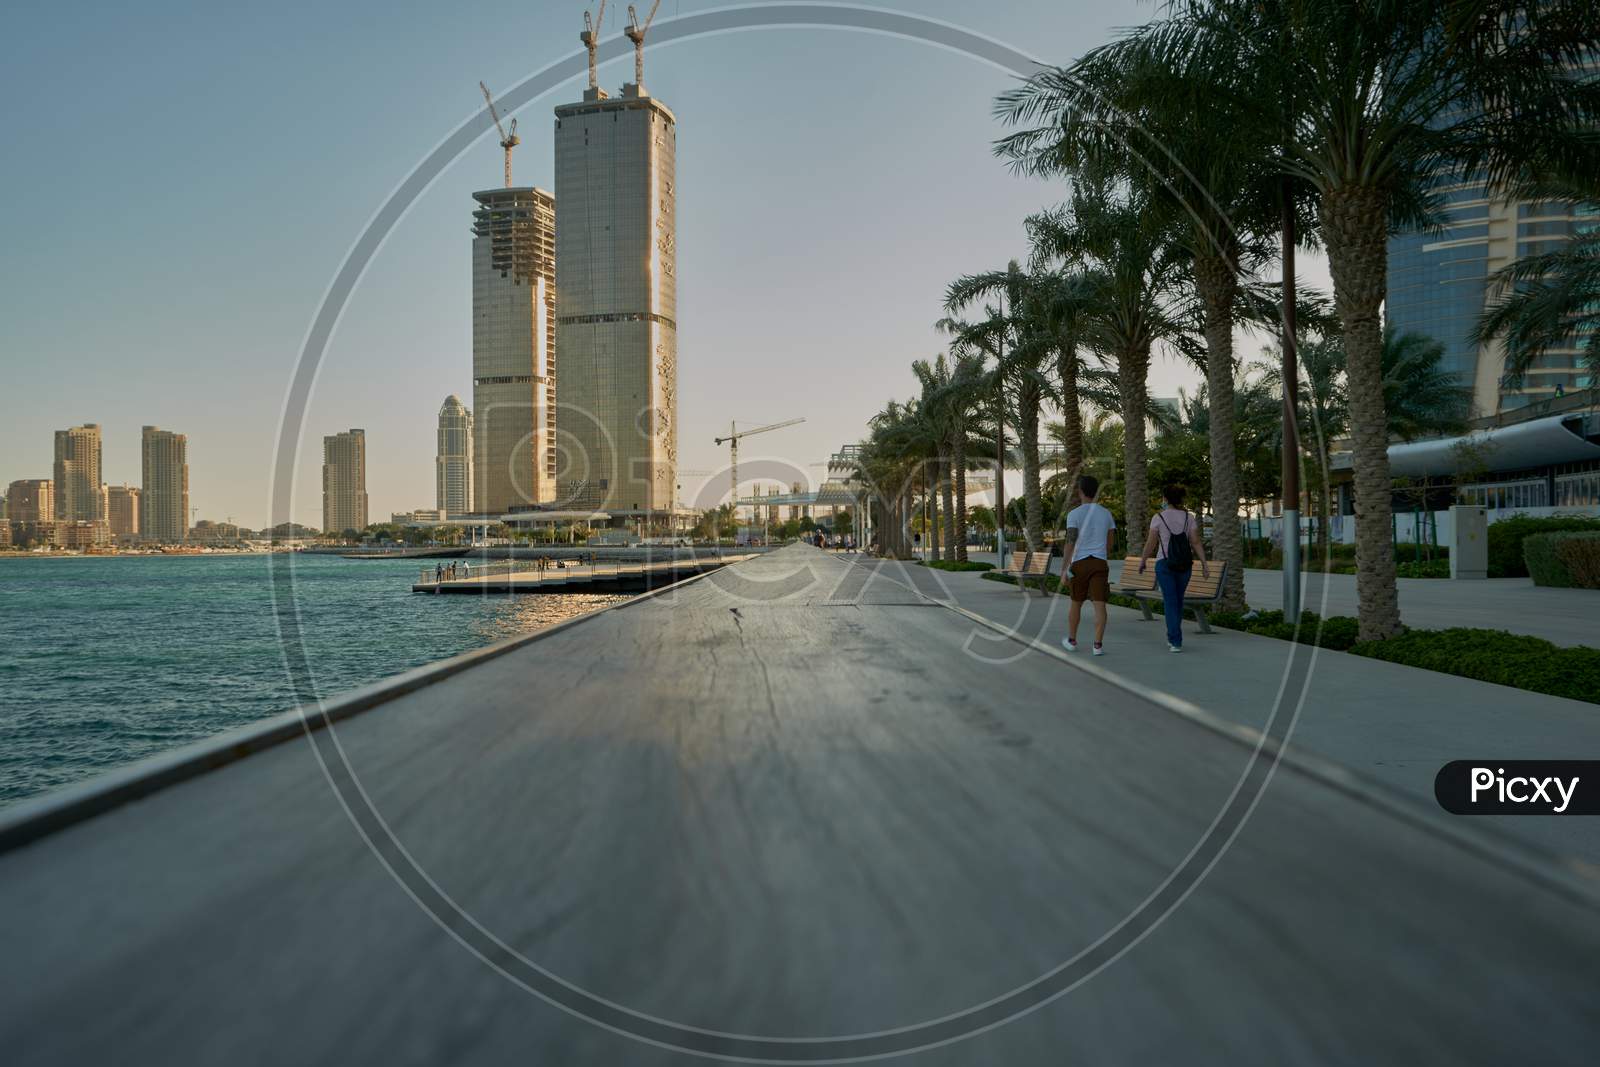 Lusail Corniche  in Lusail city, Qatar at the marina daylight view